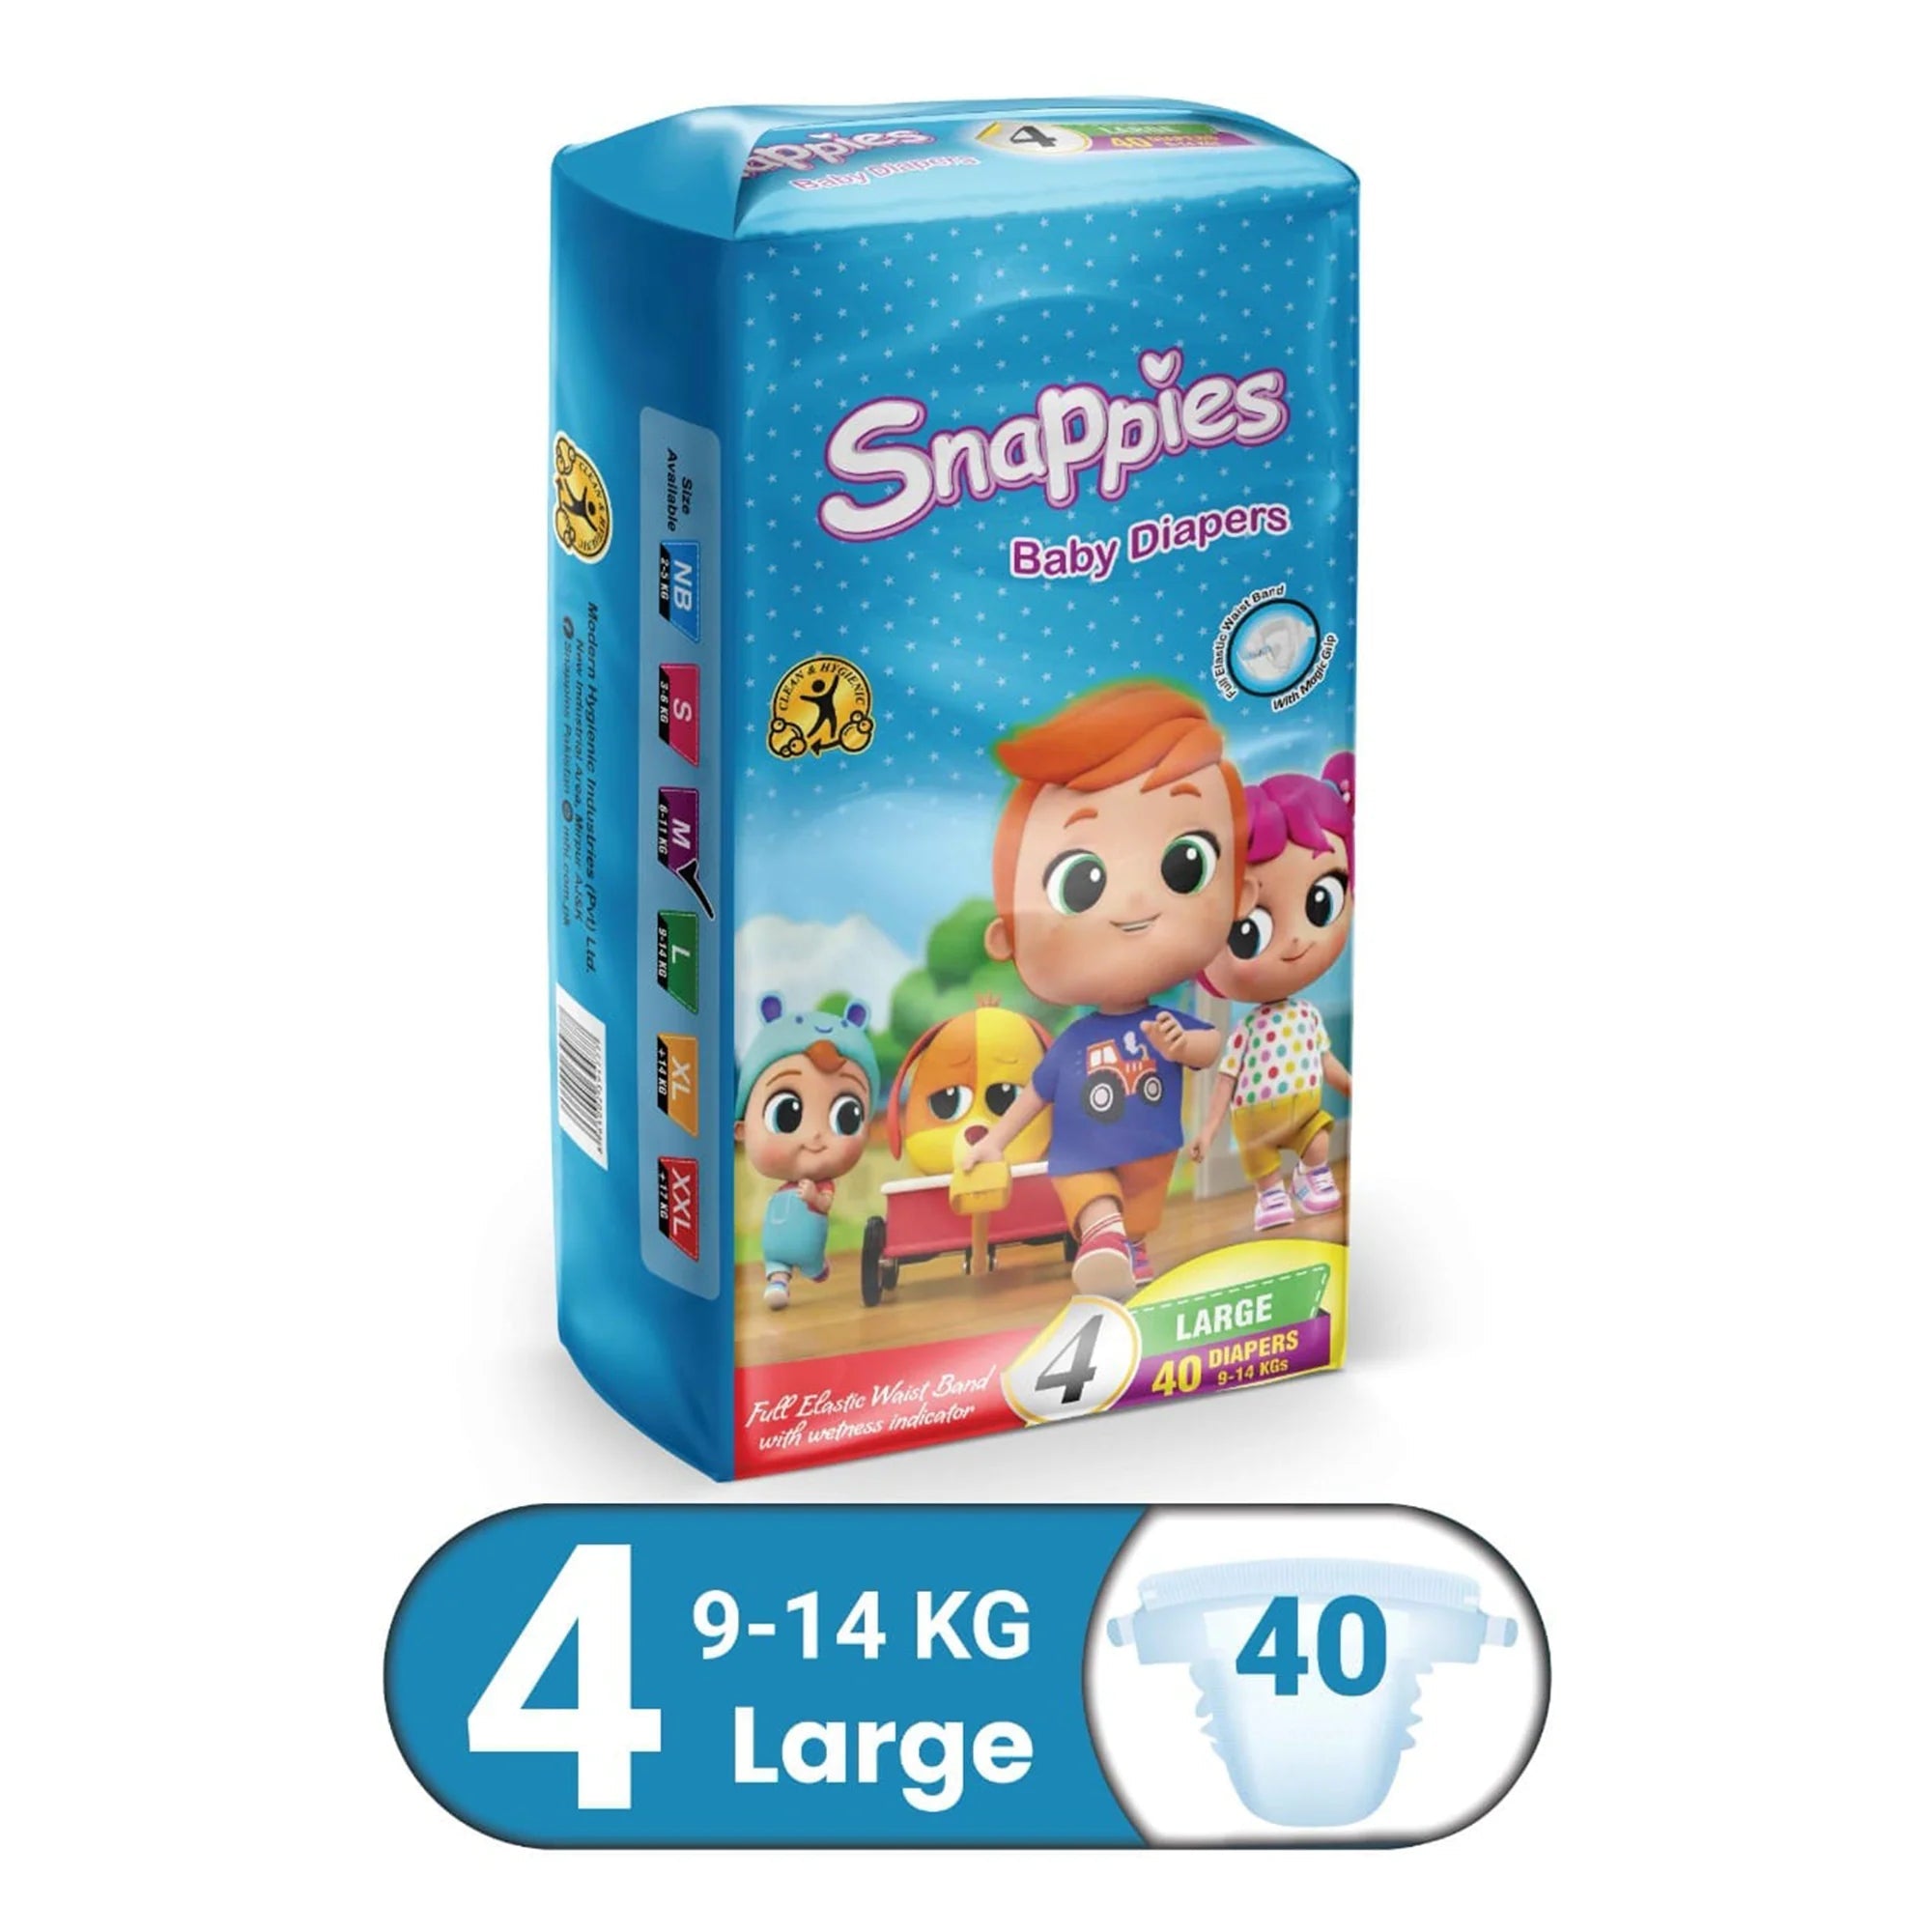 Snappies Baby Diapers 6-11 KG 3 Medium 44 Pieces - Retailershop - Online Shopping Center